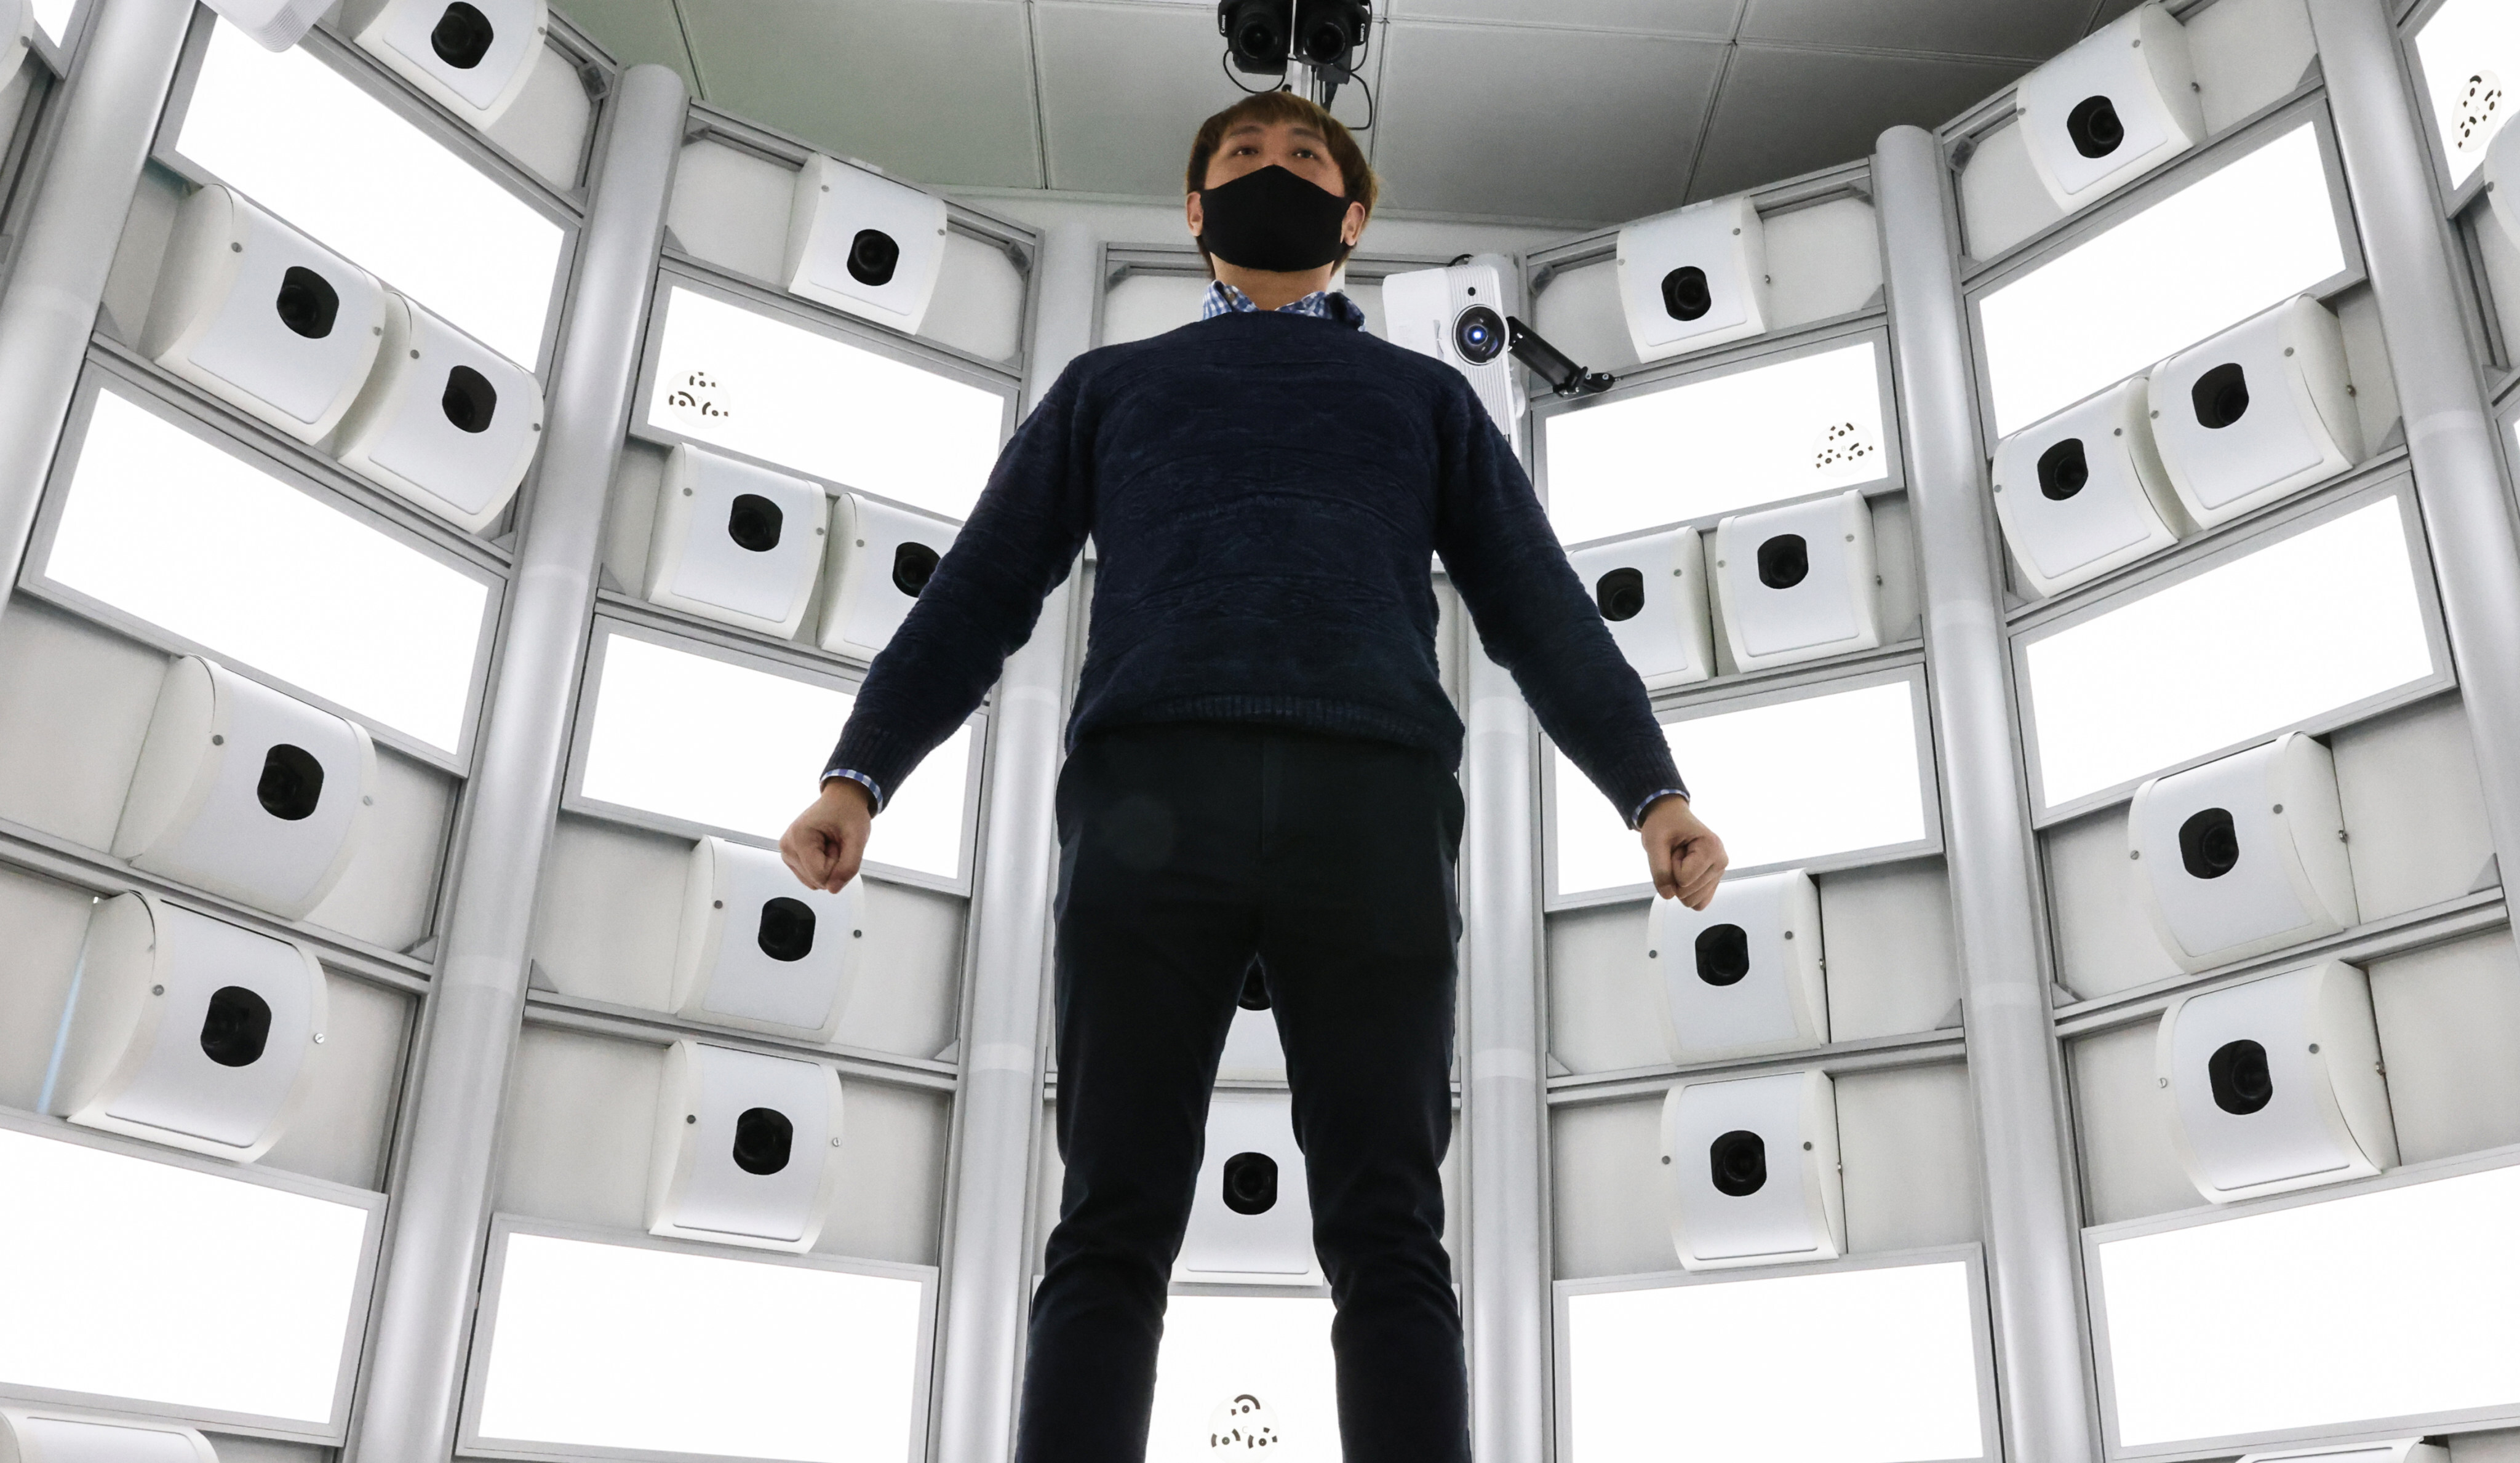 Merging technology and clothing is one of the areas of focus of the labs. Photo: K. Y. Cheng